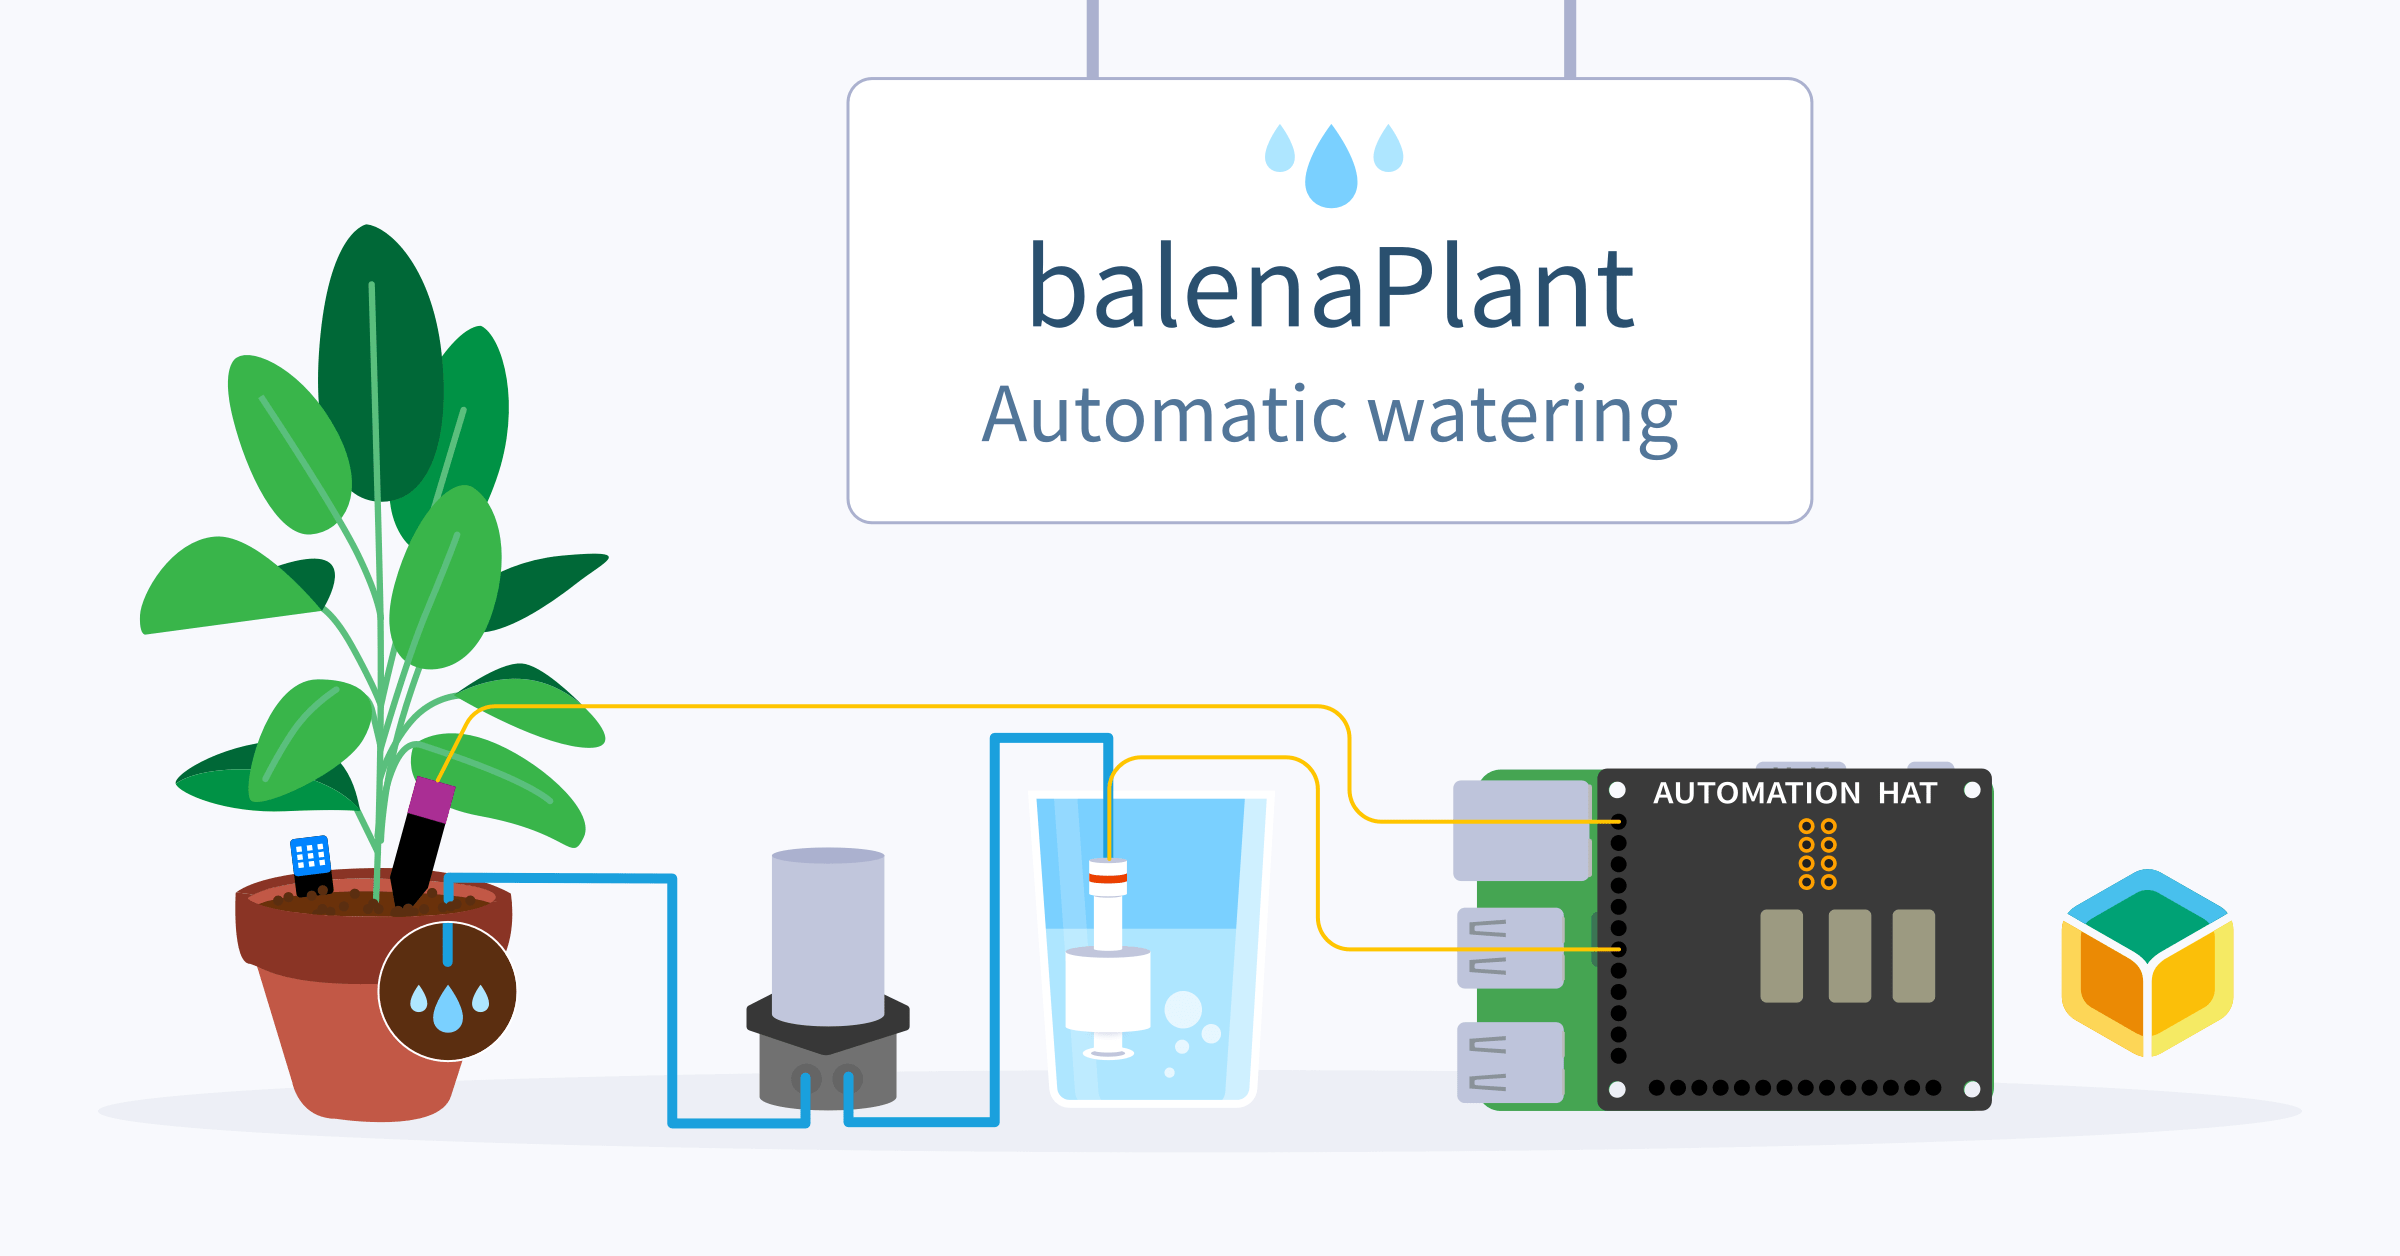 Keep your plant-friends happy and healthy with automated watering: balenaPlant